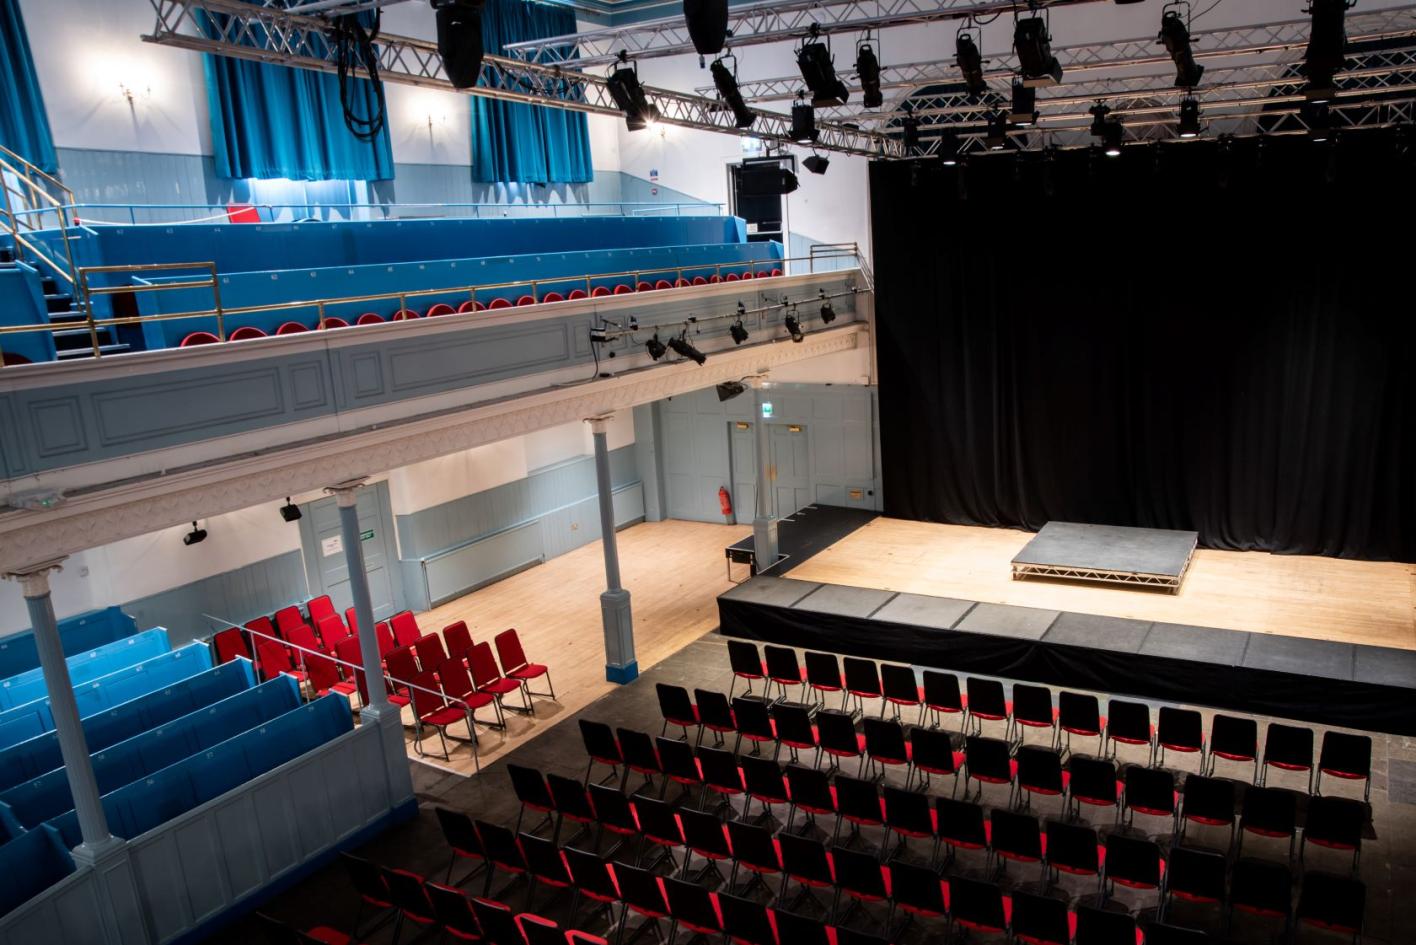 A view from the gallery across to The Queen's Hall stage showing red stall seats and blue pew seating